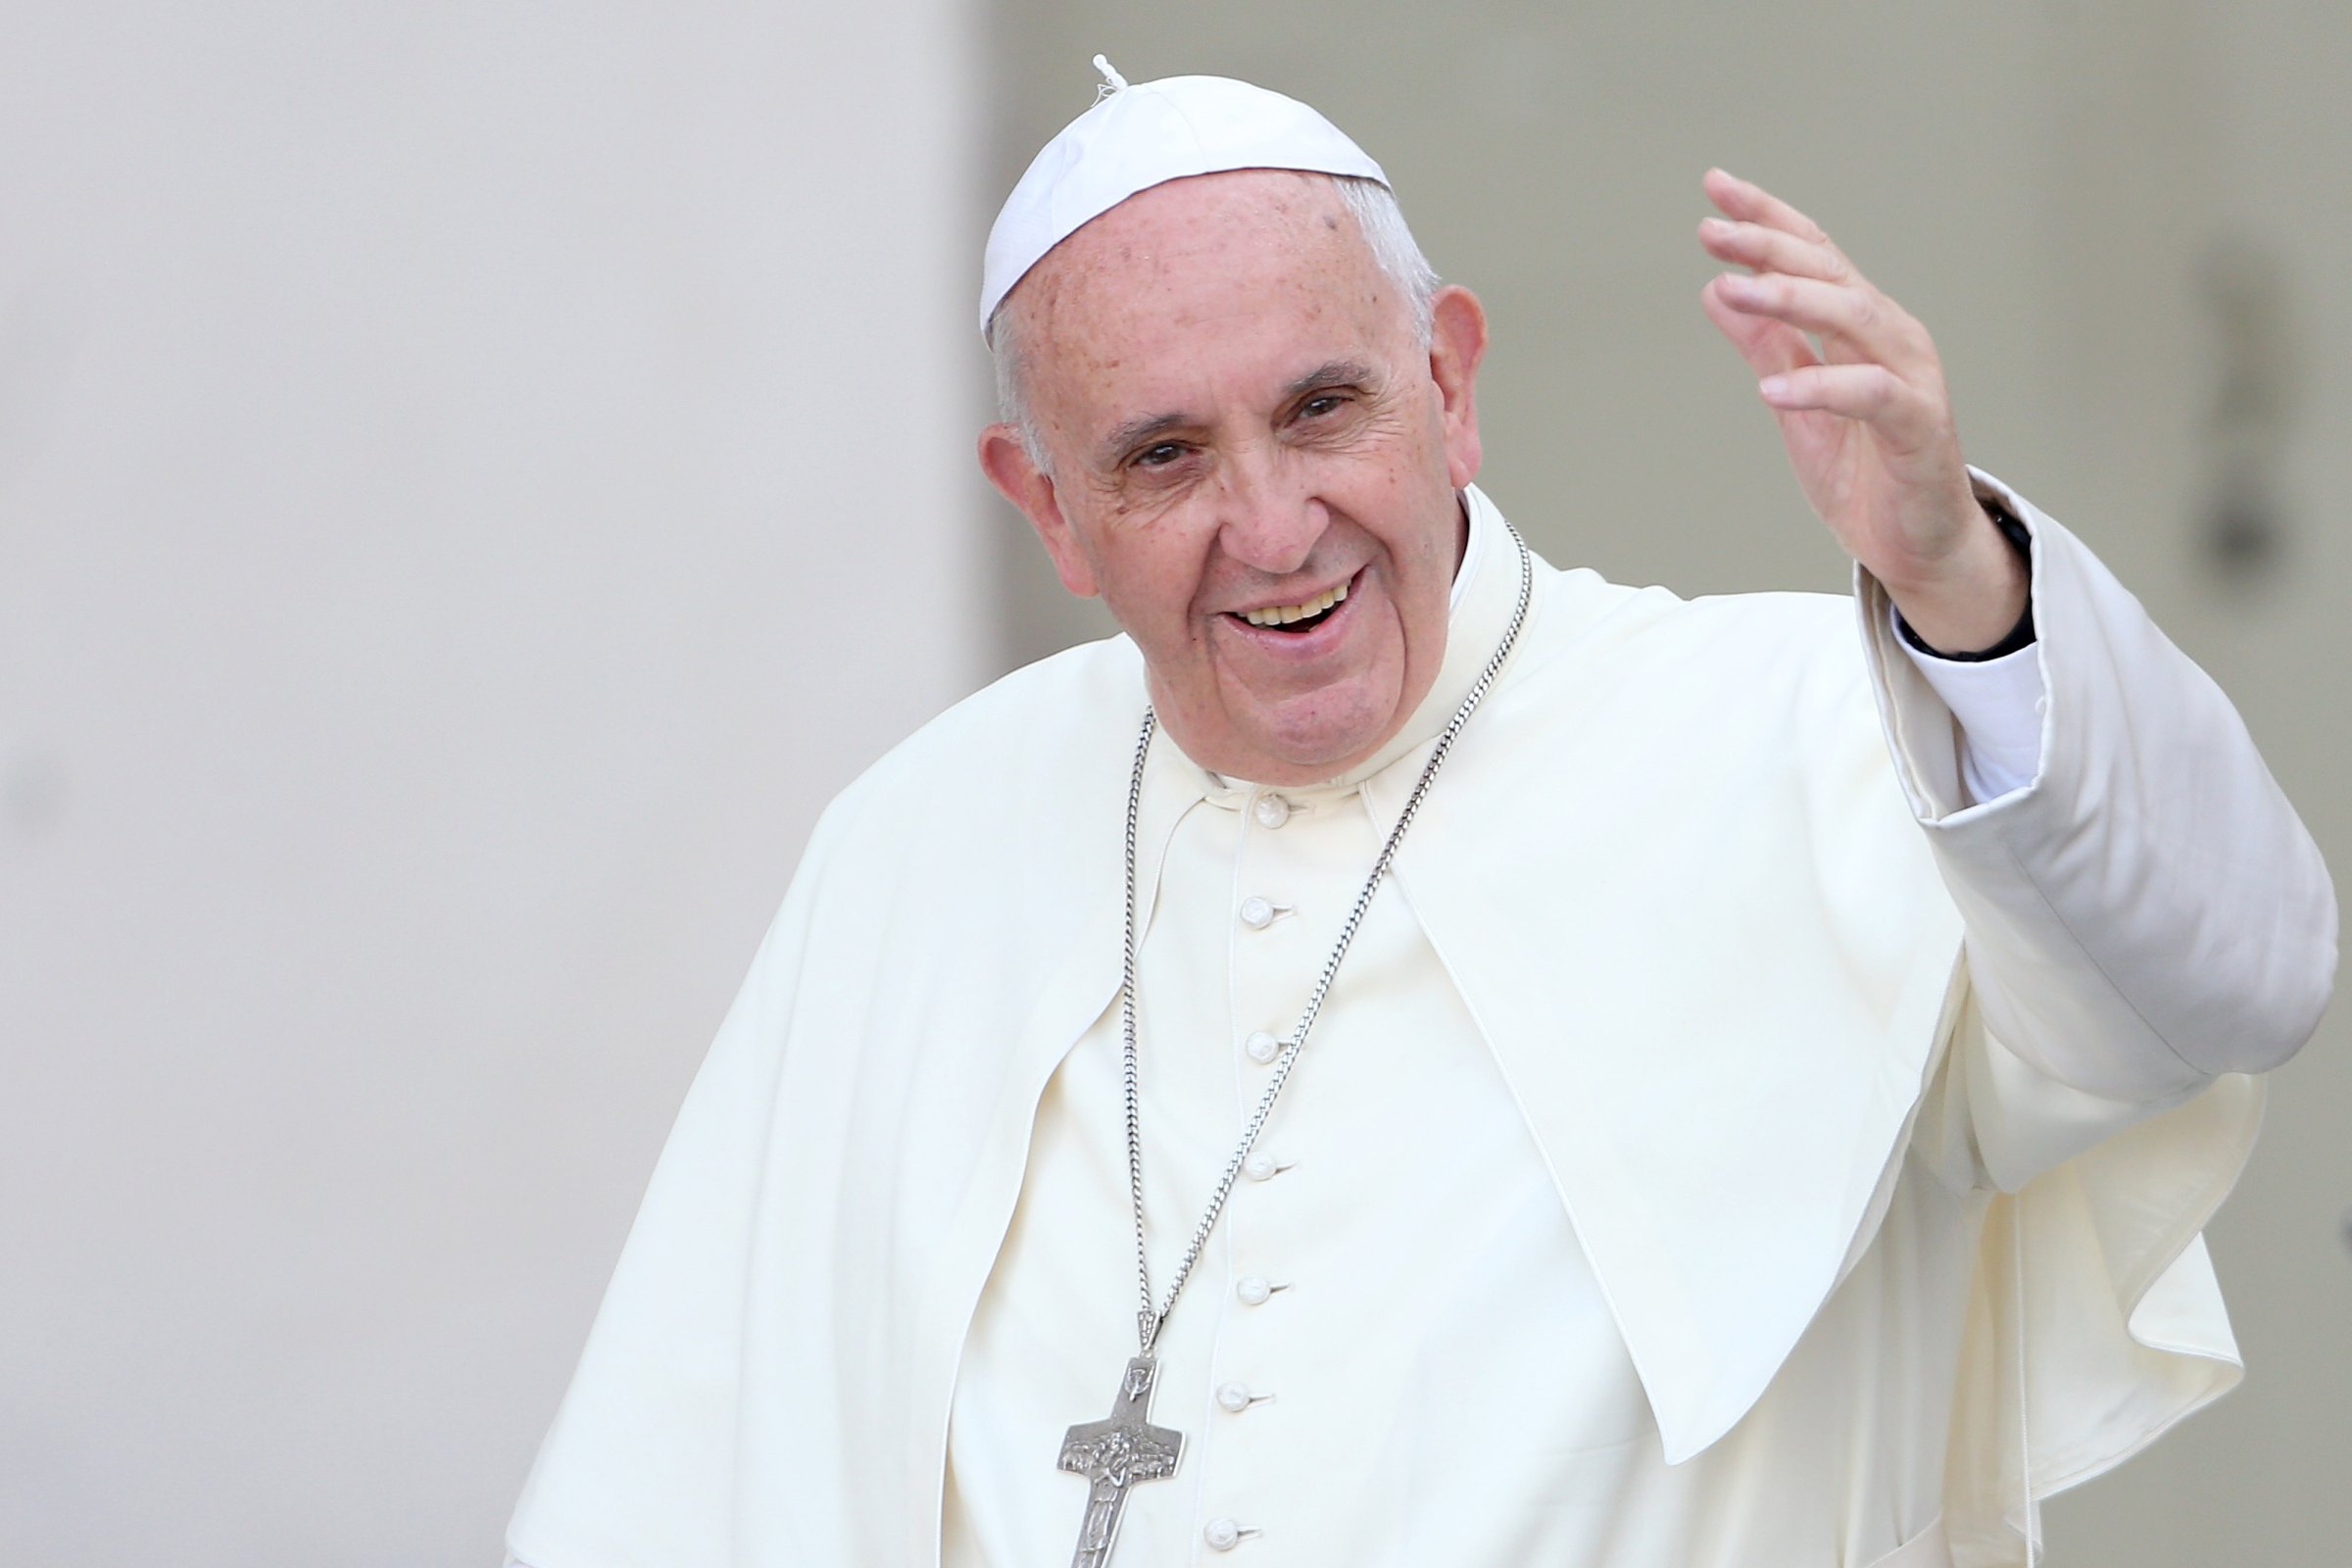 Pope Francis waves to the faithful as he arrives in St. Peter's Square for a meeting with the Roman Diocesans on June 14, 2015 in Vatican City, Vatican.